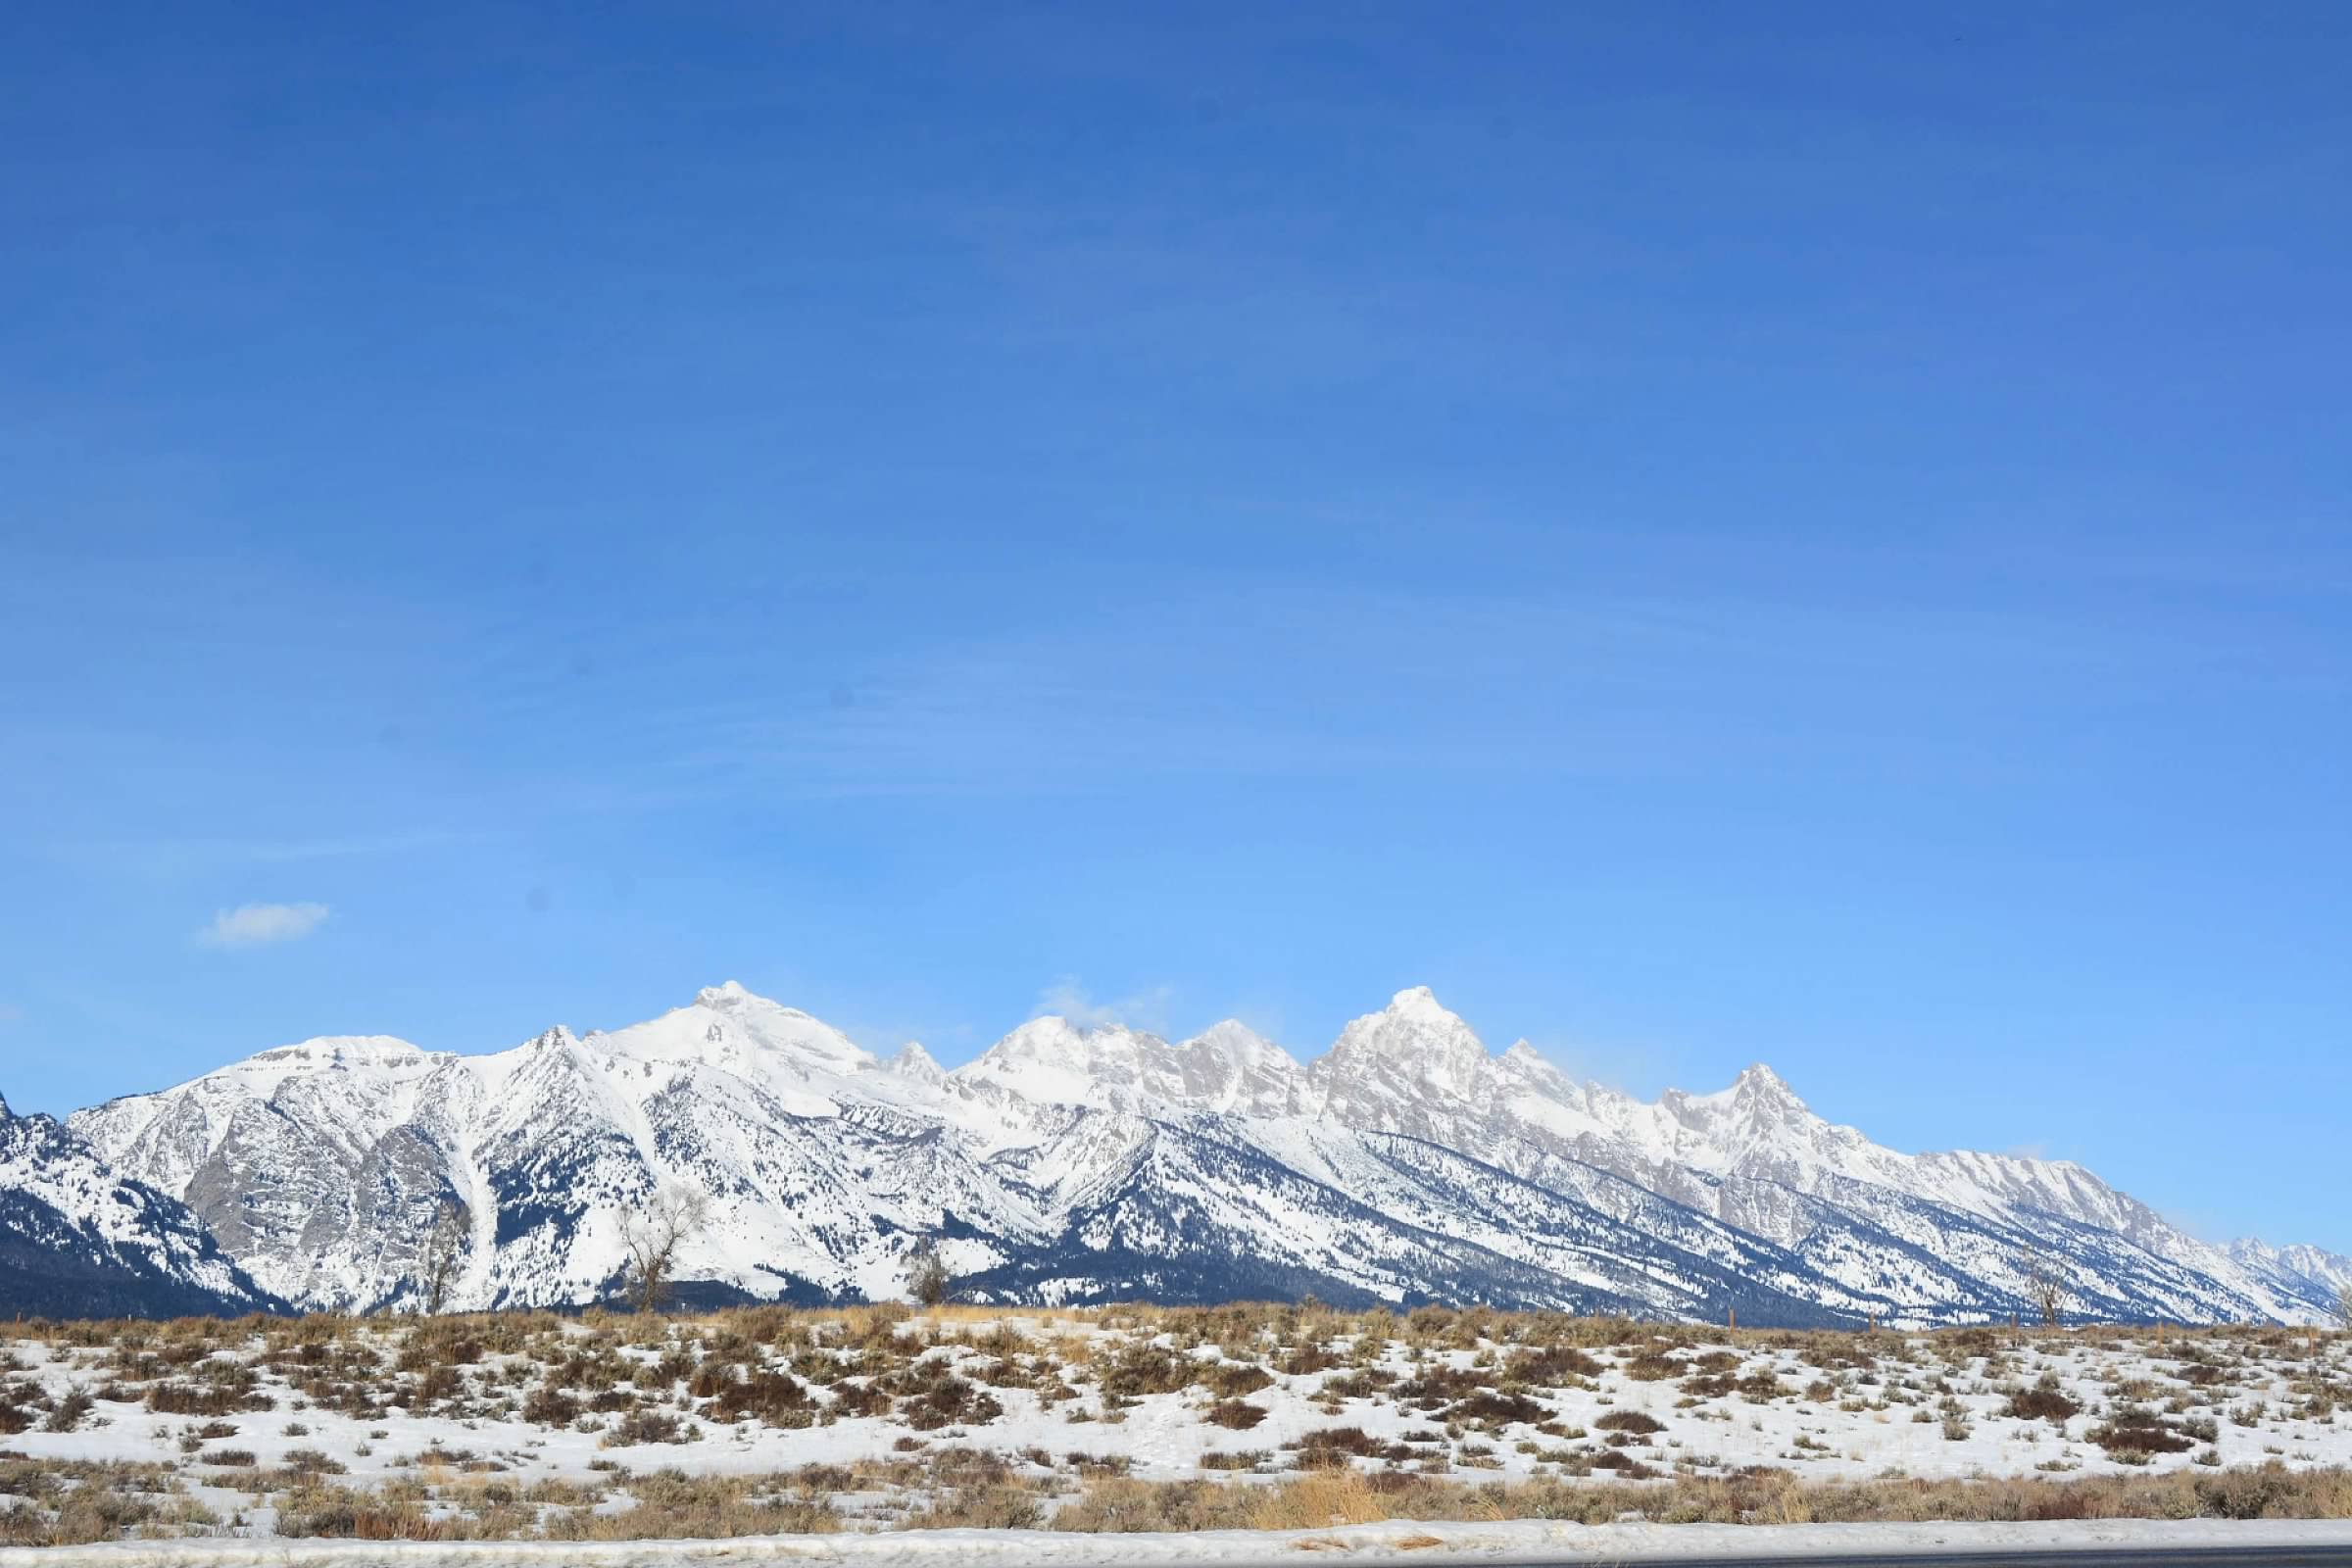 JACKSON HOLE IN WINTER: MORE THAN JUST SKIING